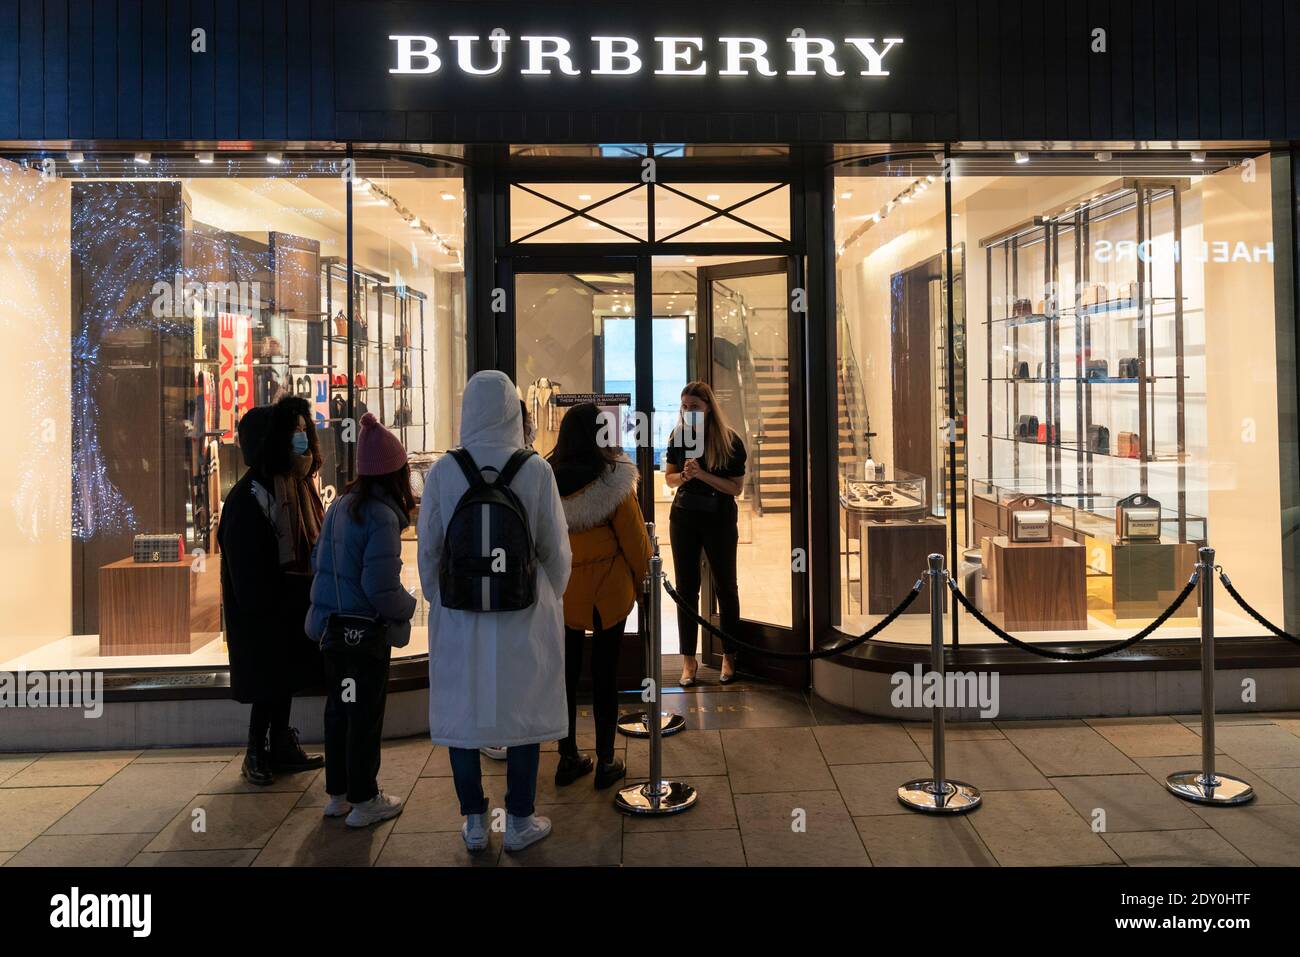 Edinburgh, Scotland, UK. 24 December 2020. Last minute Christmas shopping  just before the shops close on Christmas Eve at upmarket Multrees Walk in  Edinburgh. PoIc; Chinese shoppers too late to enter Burberry